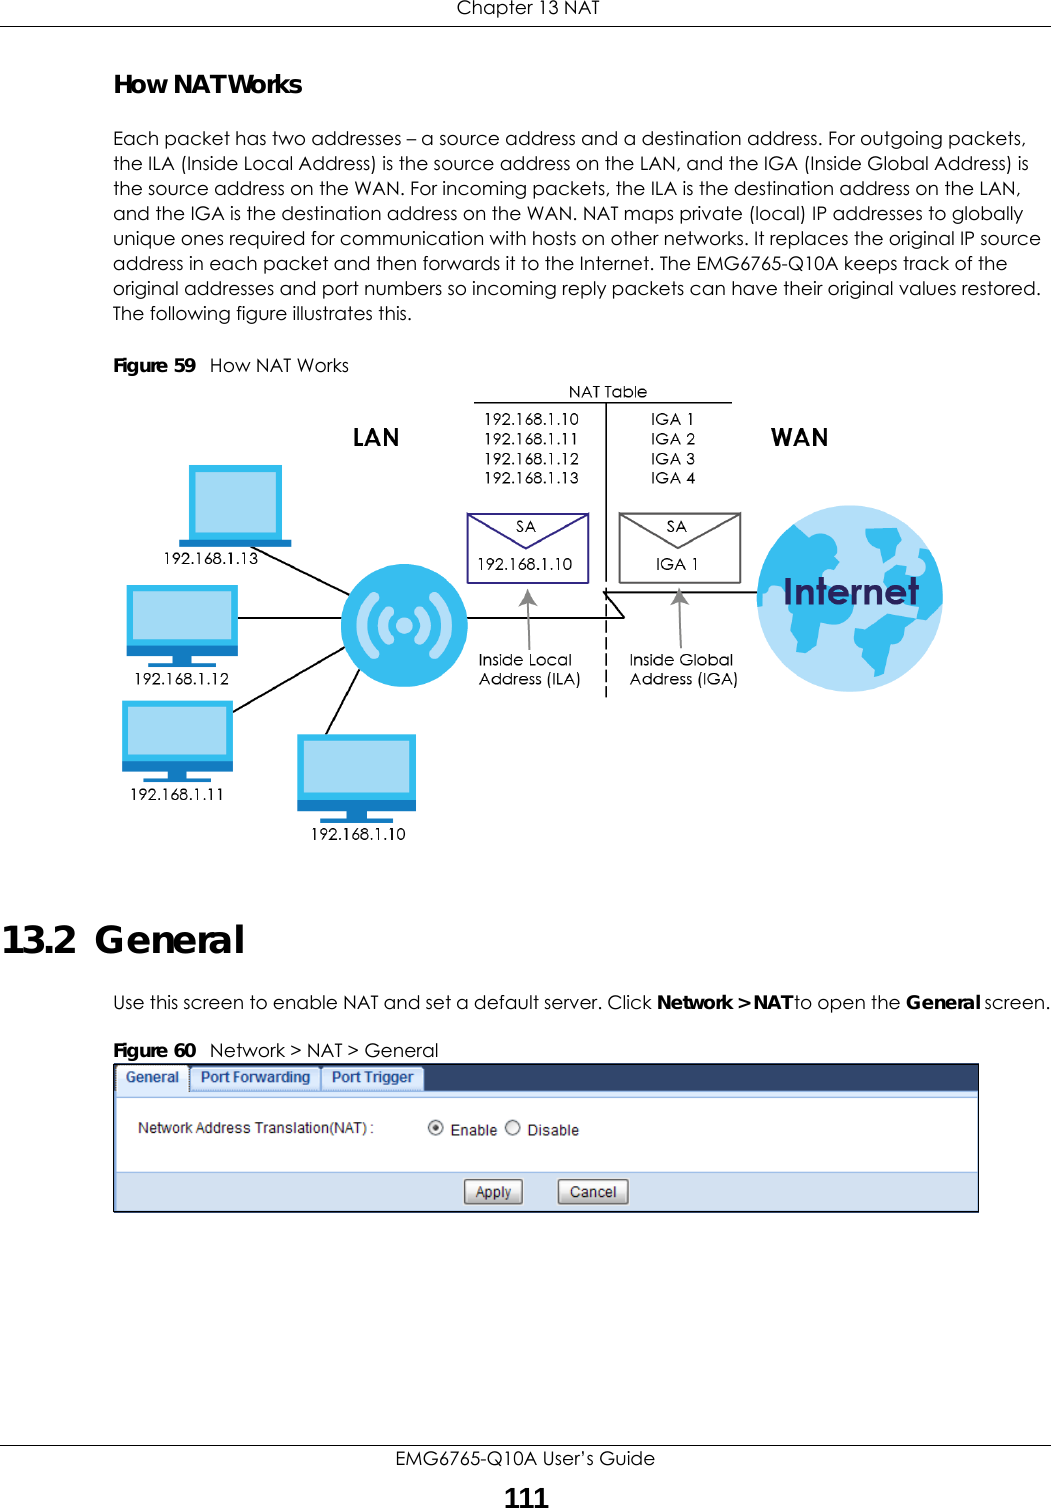  Chapter 13 NATEMG6765-Q10A User’s Guide111How NAT WorksEach packet has two addresses – a source address and a destination address. For outgoing packets, the ILA (Inside Local Address) is the source address on the LAN, and the IGA (Inside Global Address) is the source address on the WAN. For incoming packets, the ILA is the destination address on the LAN, and the IGA is the destination address on the WAN. NAT maps private (local) IP addresses to globally unique ones required for communication with hosts on other networks. It replaces the original IP source address in each packet and then forwards it to the Internet. The EMG6765-Q10A keeps track of the original addresses and port numbers so incoming reply packets can have their original values restored. The following figure illustrates this.Figure 59   How NAT Works13.2  GeneralUse this screen to enable NAT and set a default server. Click Network &gt; NAT to open the General screen.Figure 60   Network &gt; NAT &gt; General 